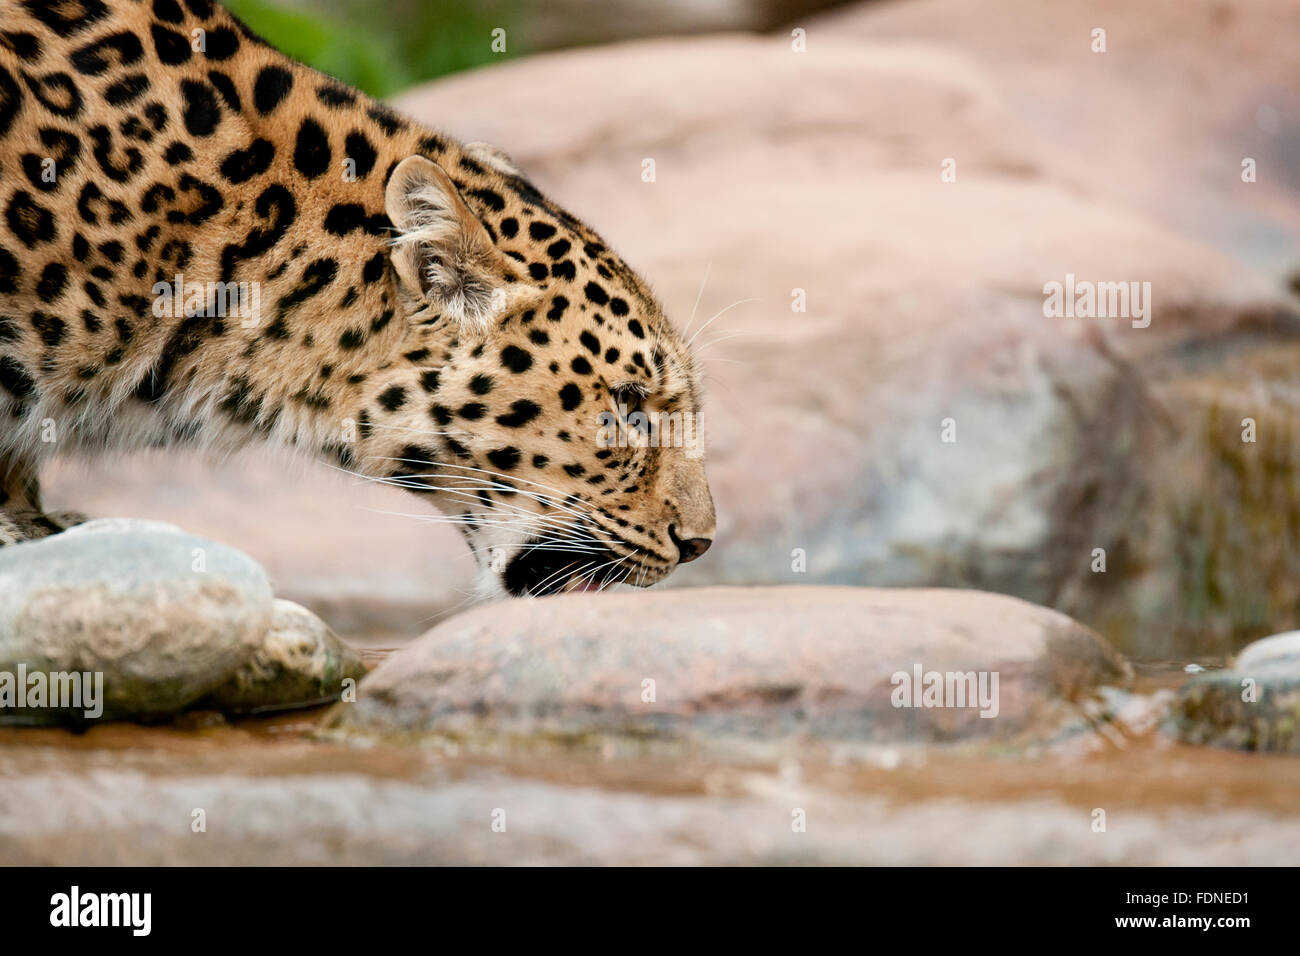 The Amur leopard is probably the most endangered big cat in the world, with as few as 45 adults left in the Wild (according to t Stock Photo